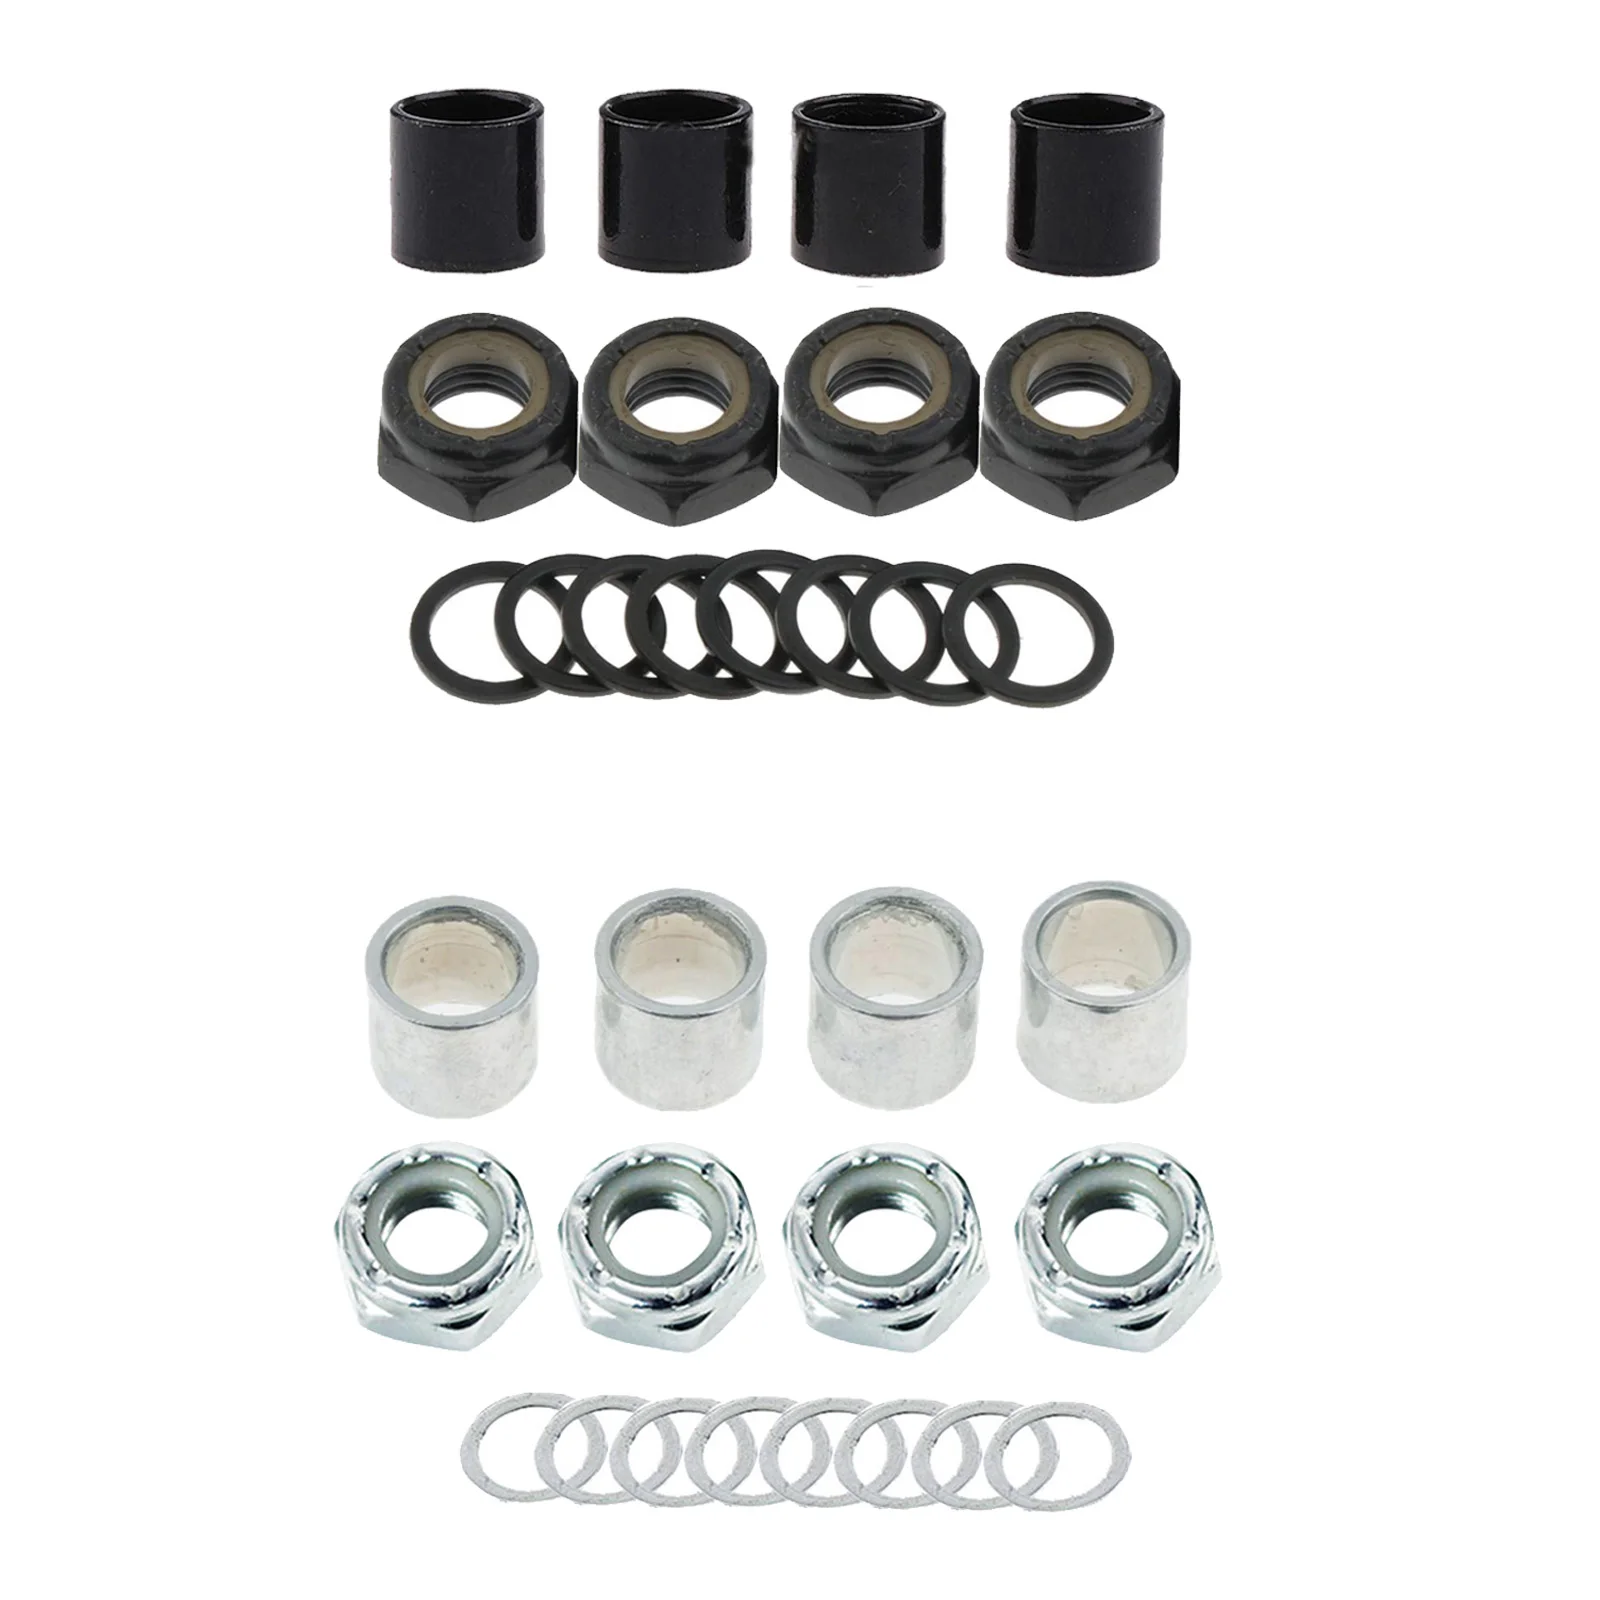 Skateboard Truck Speed Kit Axle Washers /Nuts /Spacers For Bearing Repair Tools 